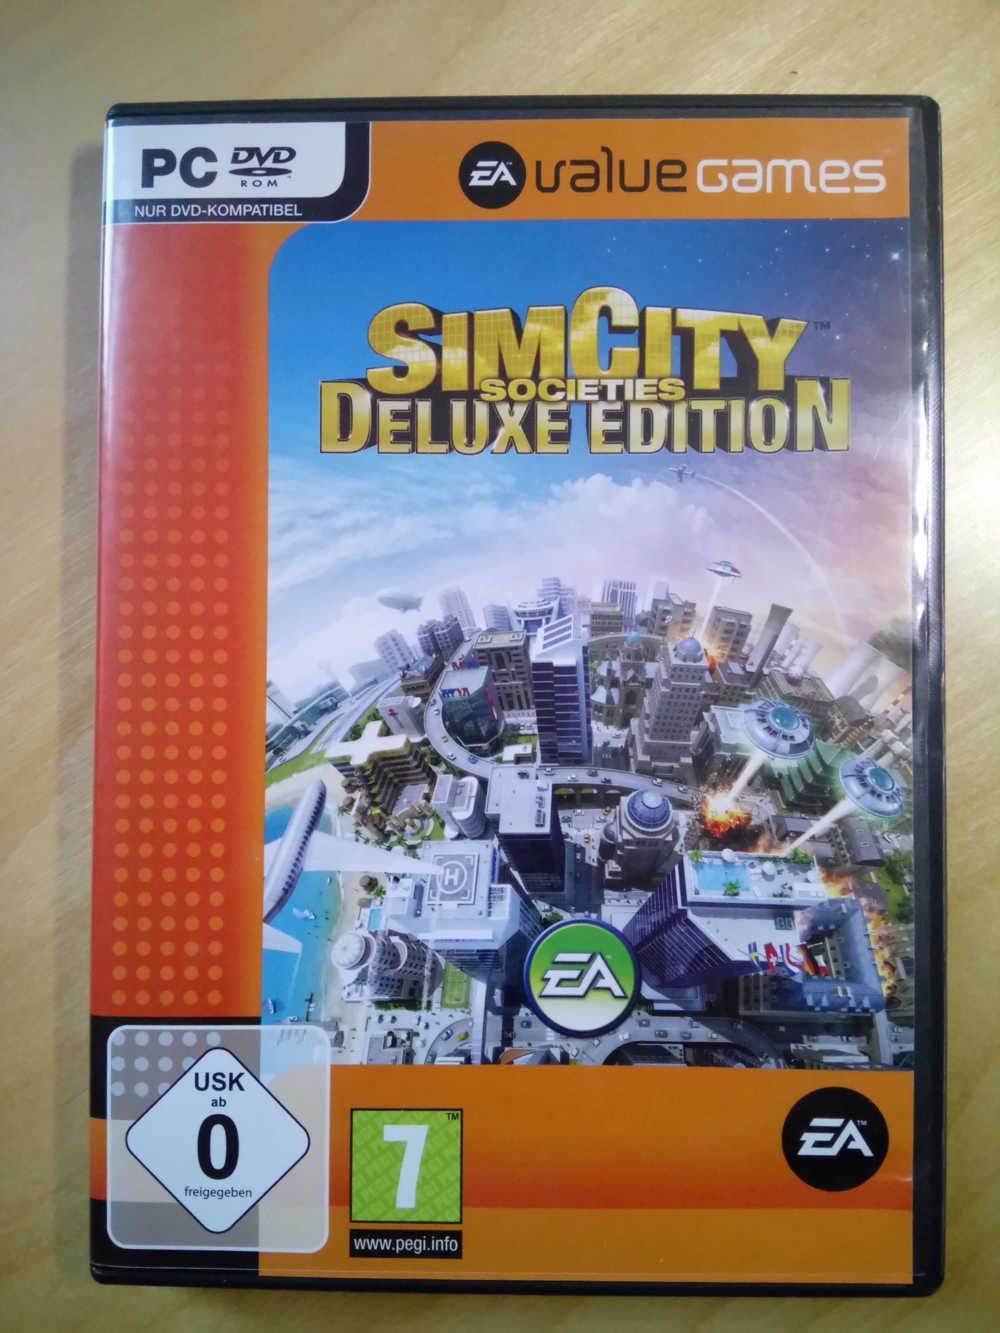 SIMCITY SOCIETIES DELUXE EDITION